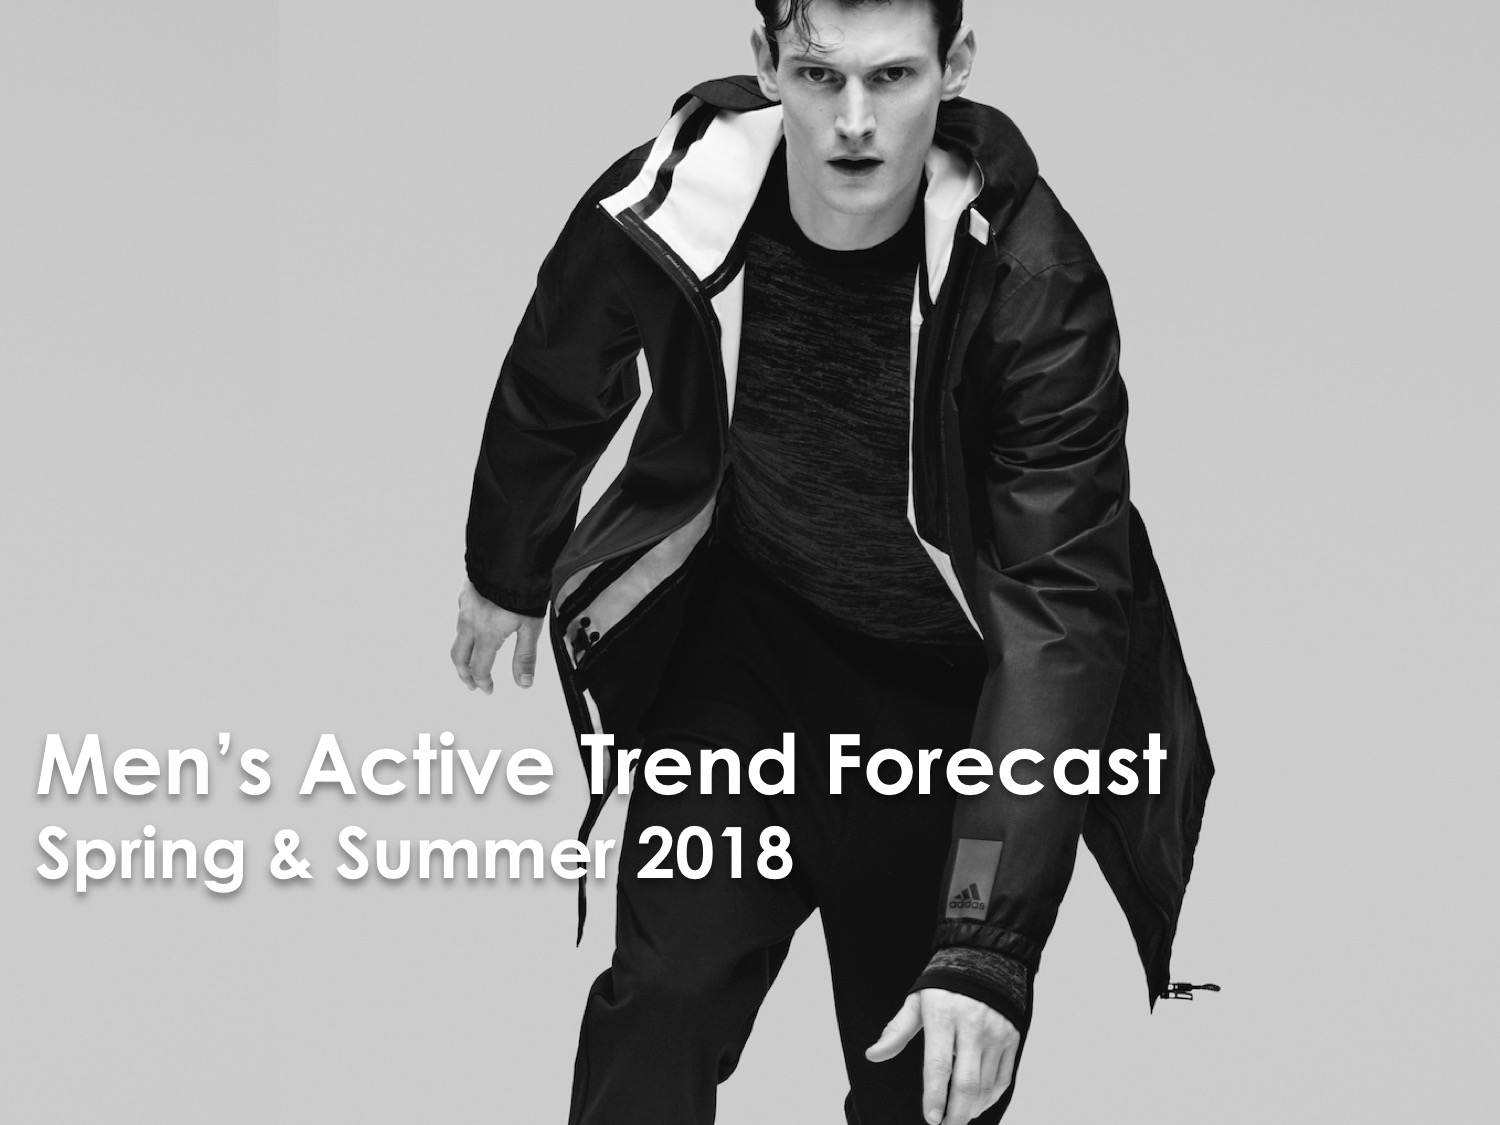 Activewear trends for spring and summer 2018